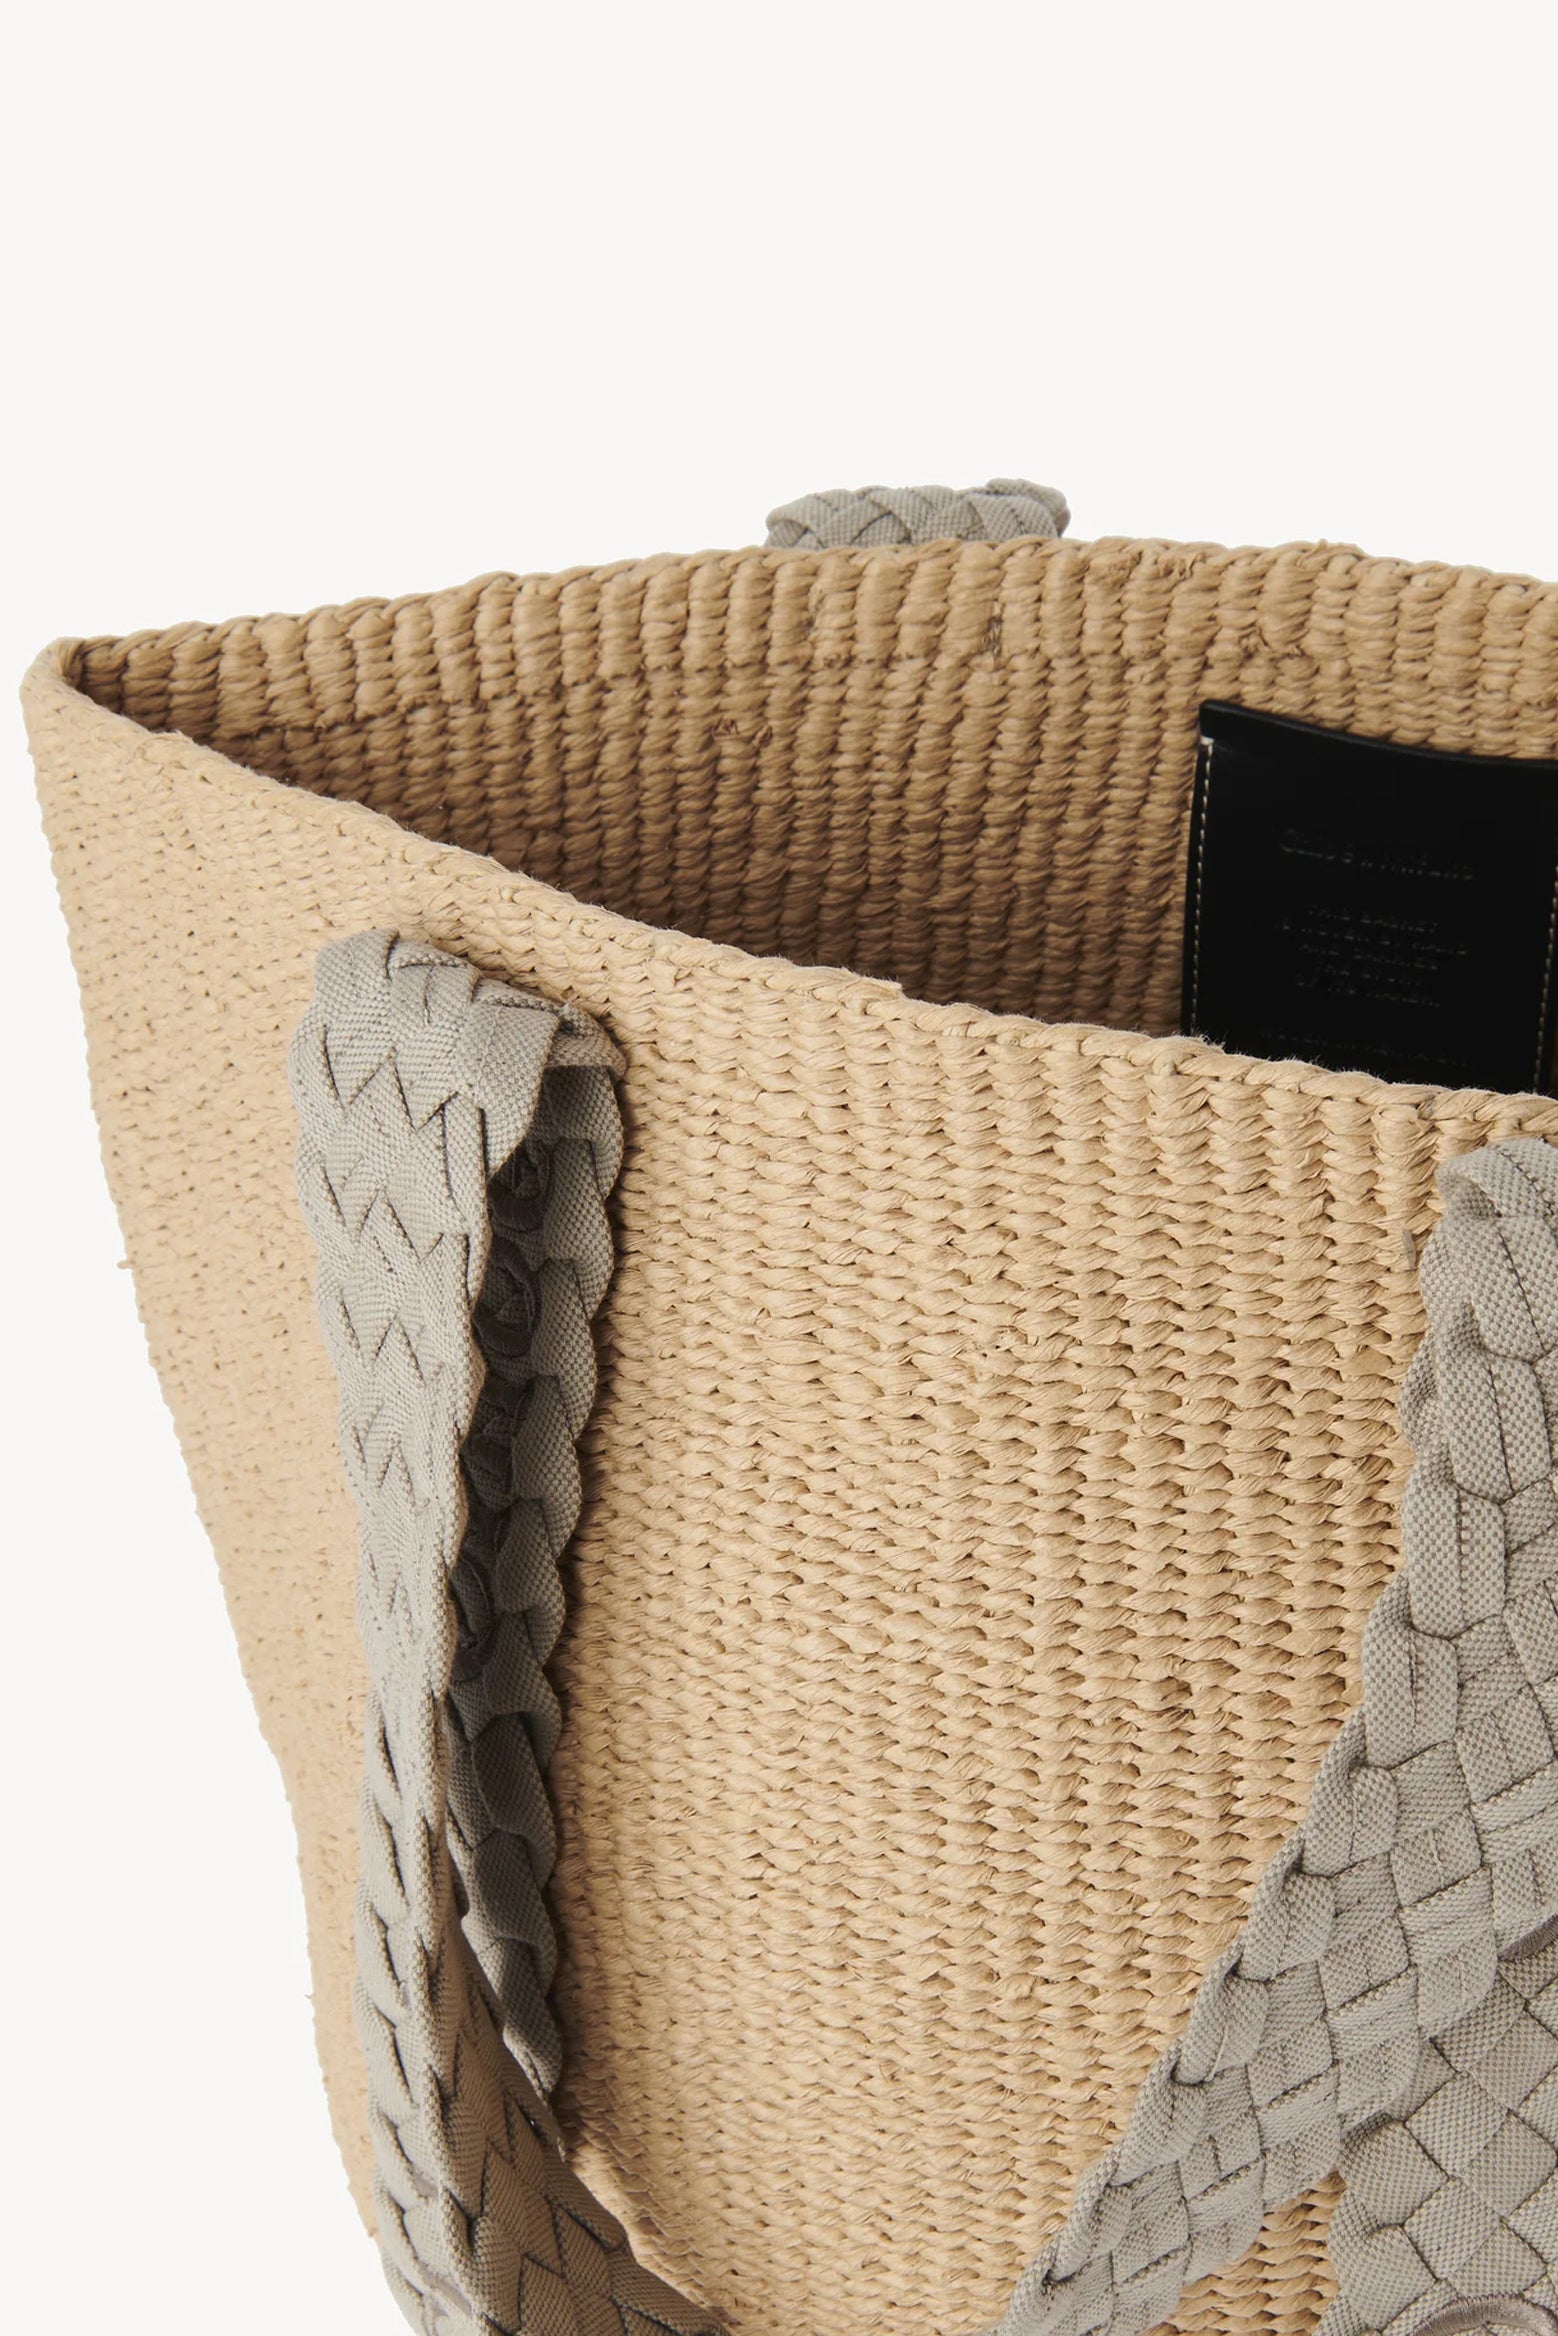 Chloe Woody Large Basket Bag in Pastel Grey available at The New Trend Australia.